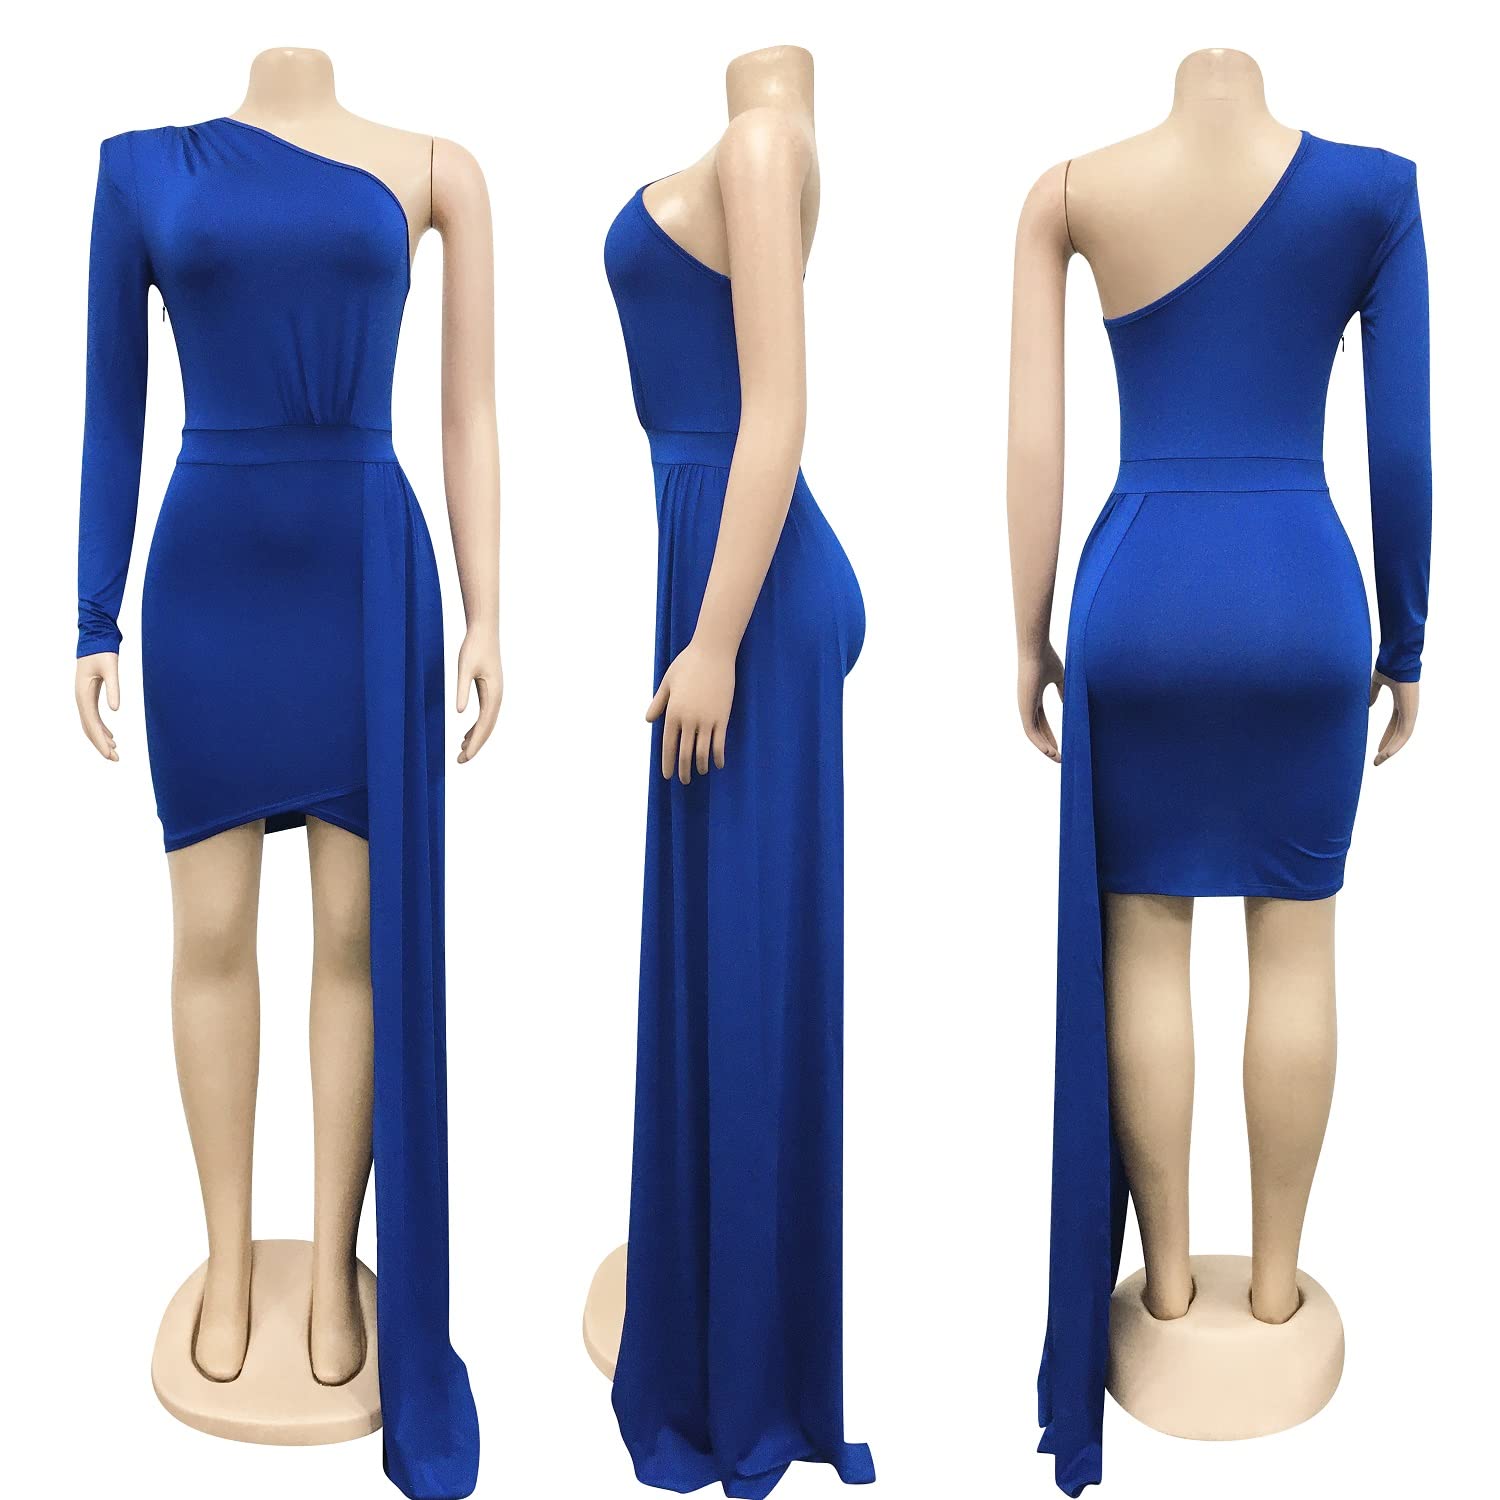 Zoctuo Womens Sexy Elegant Solid Color Cocktail Birthday Dress Party Club Outfit Bodycon Clubwear